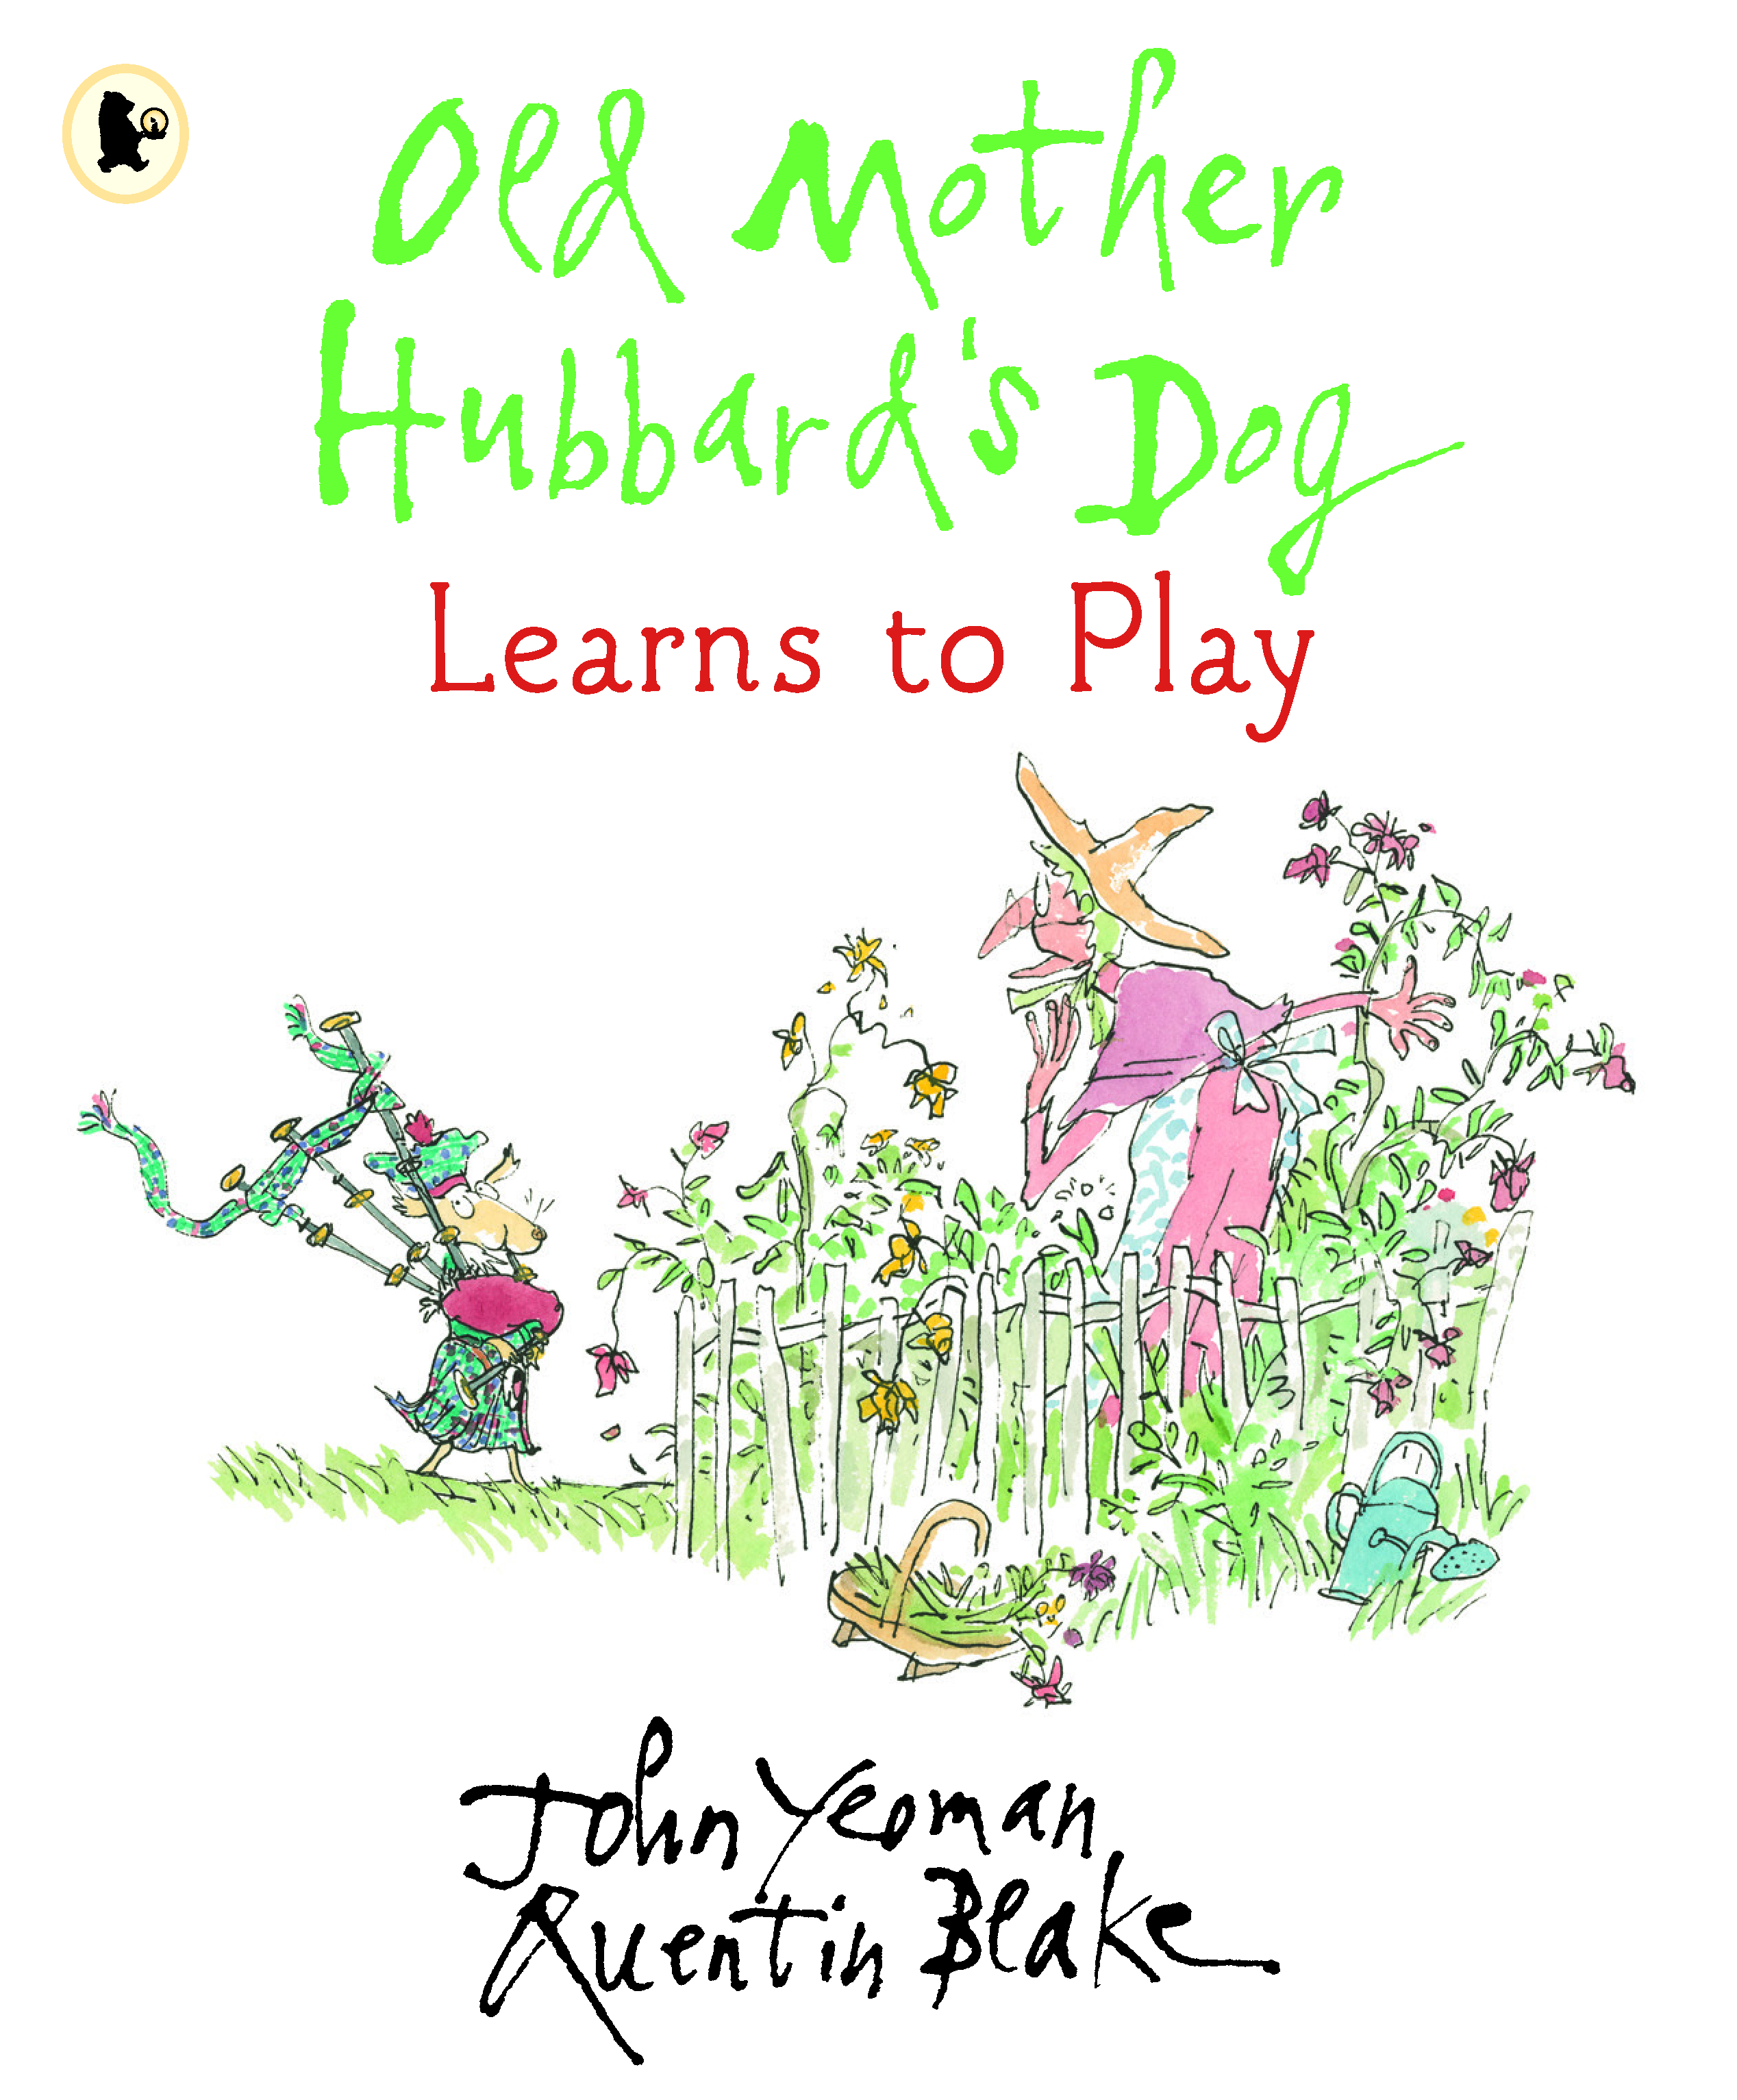 Old-Mother-Hubbard-s-Dog-Learns-to-Play